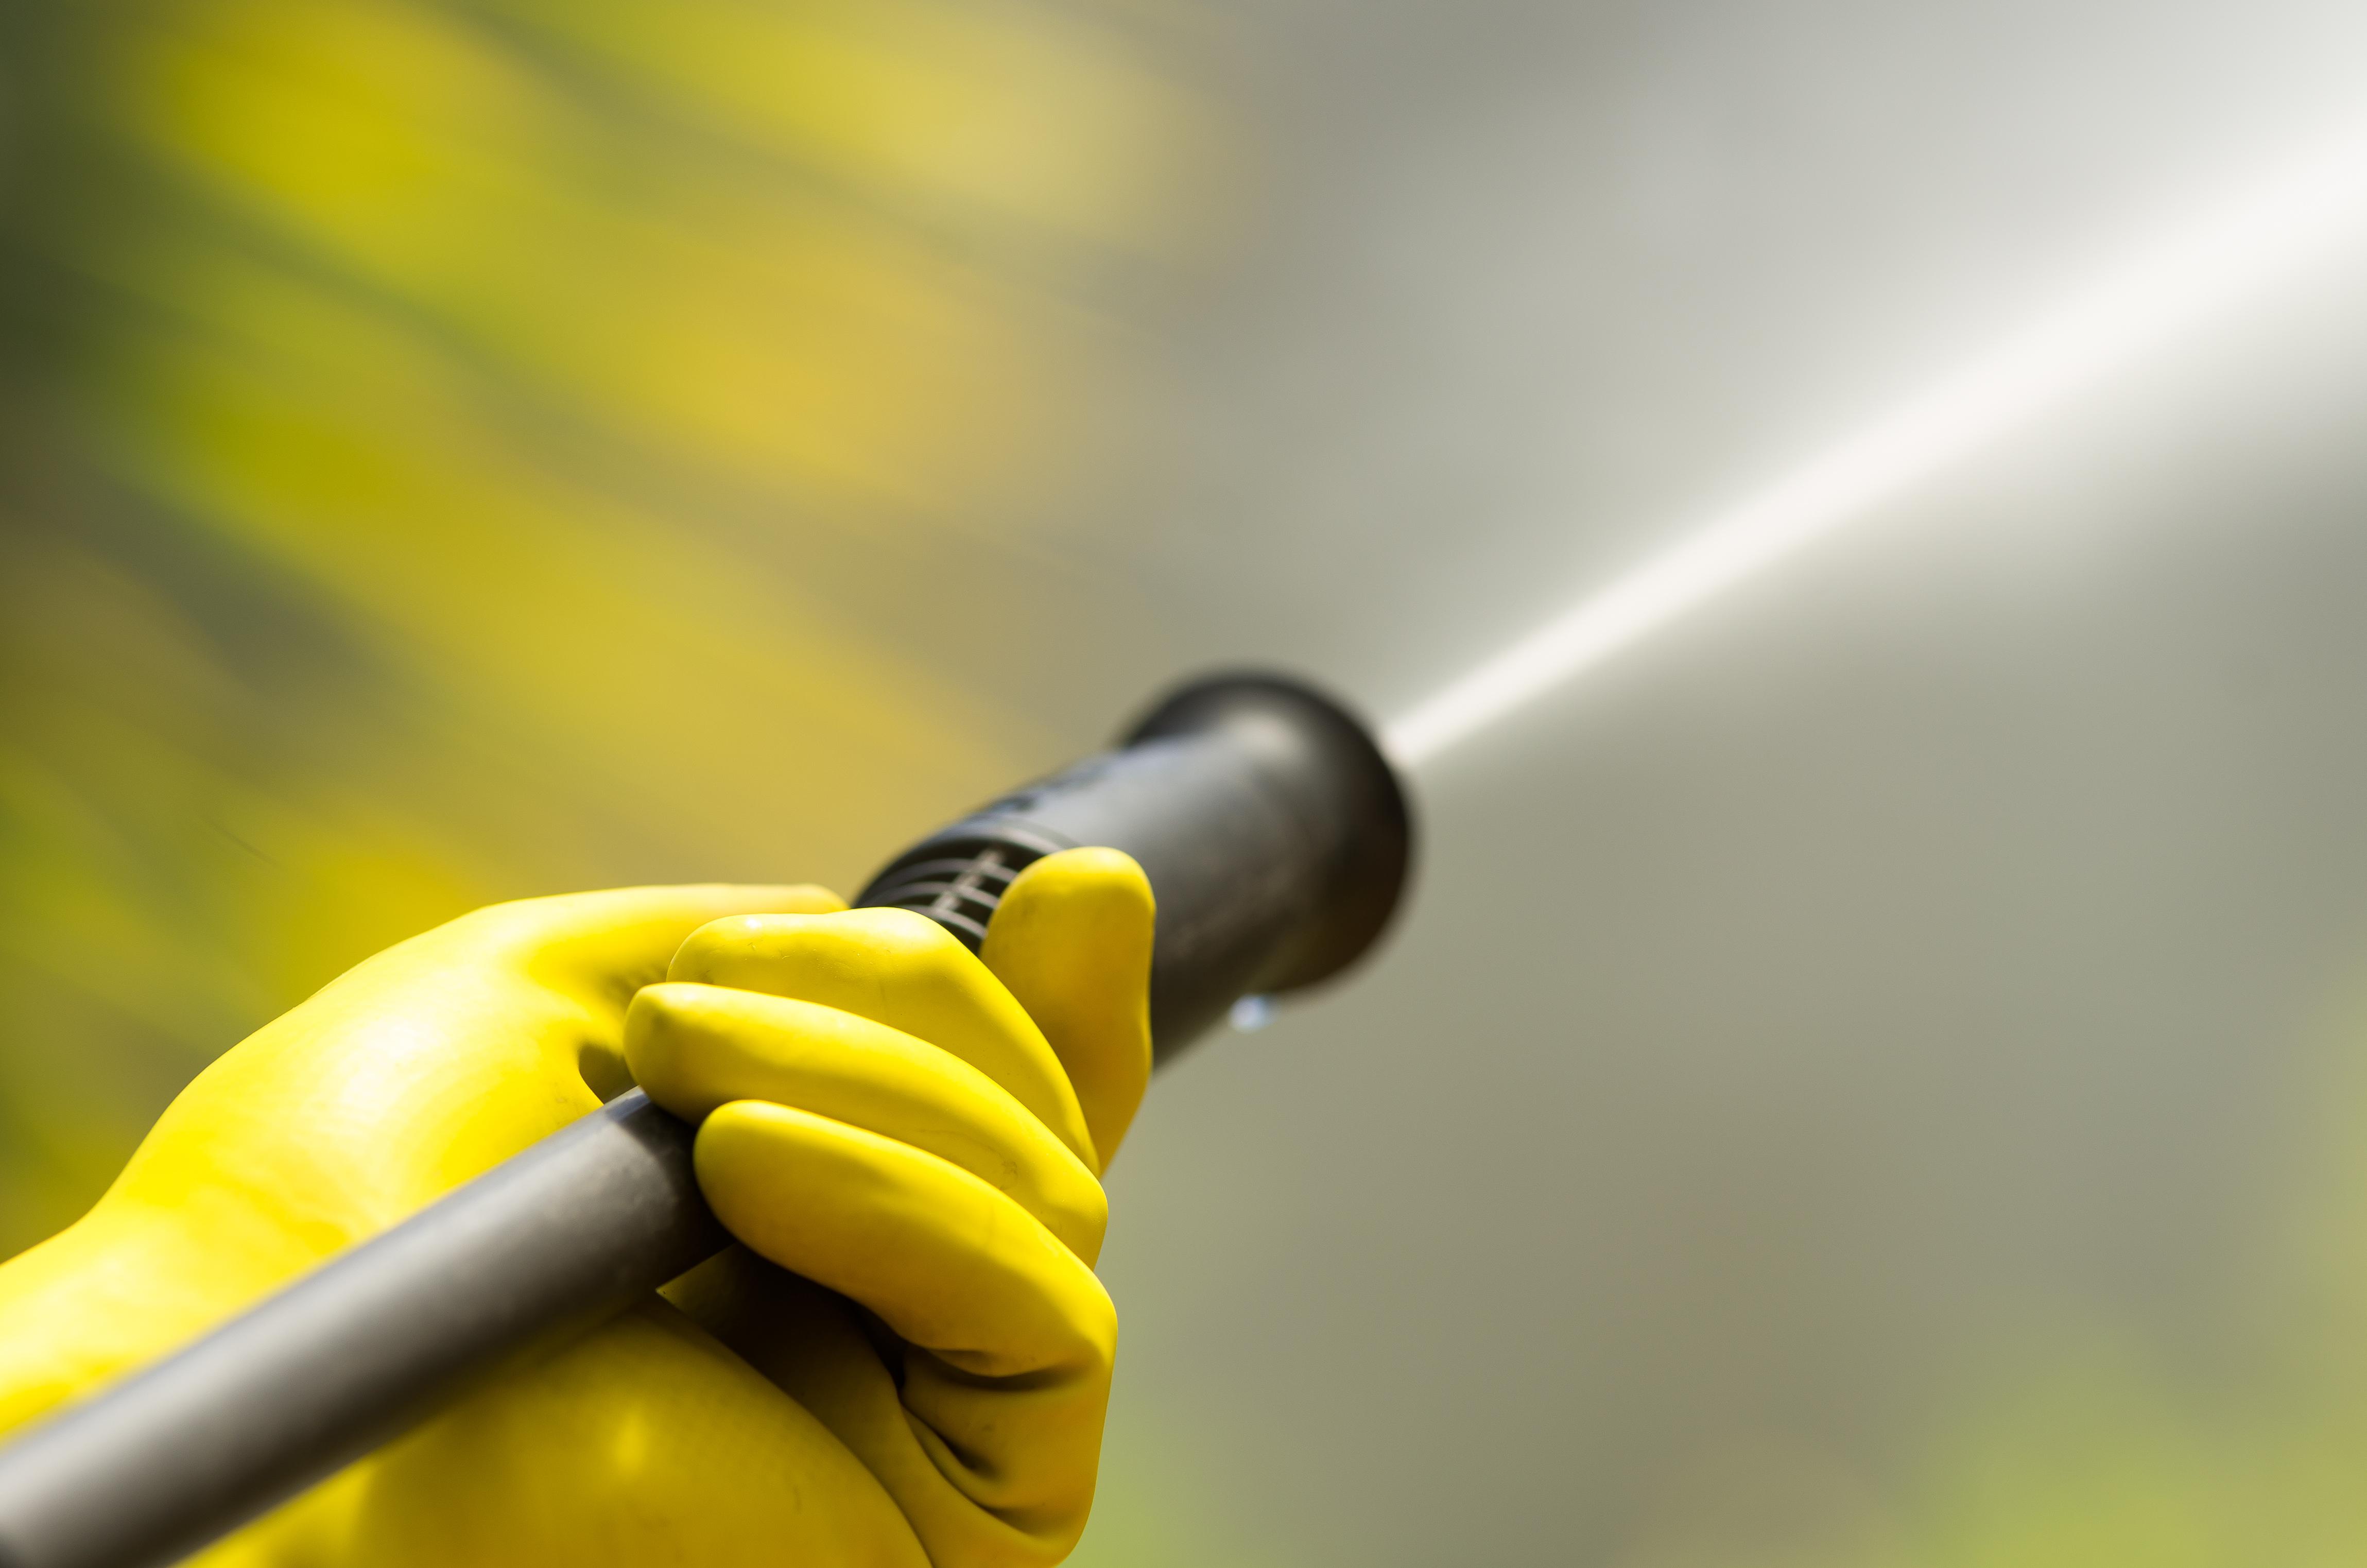 Contuning Education - Pressure Washing Commercial Property